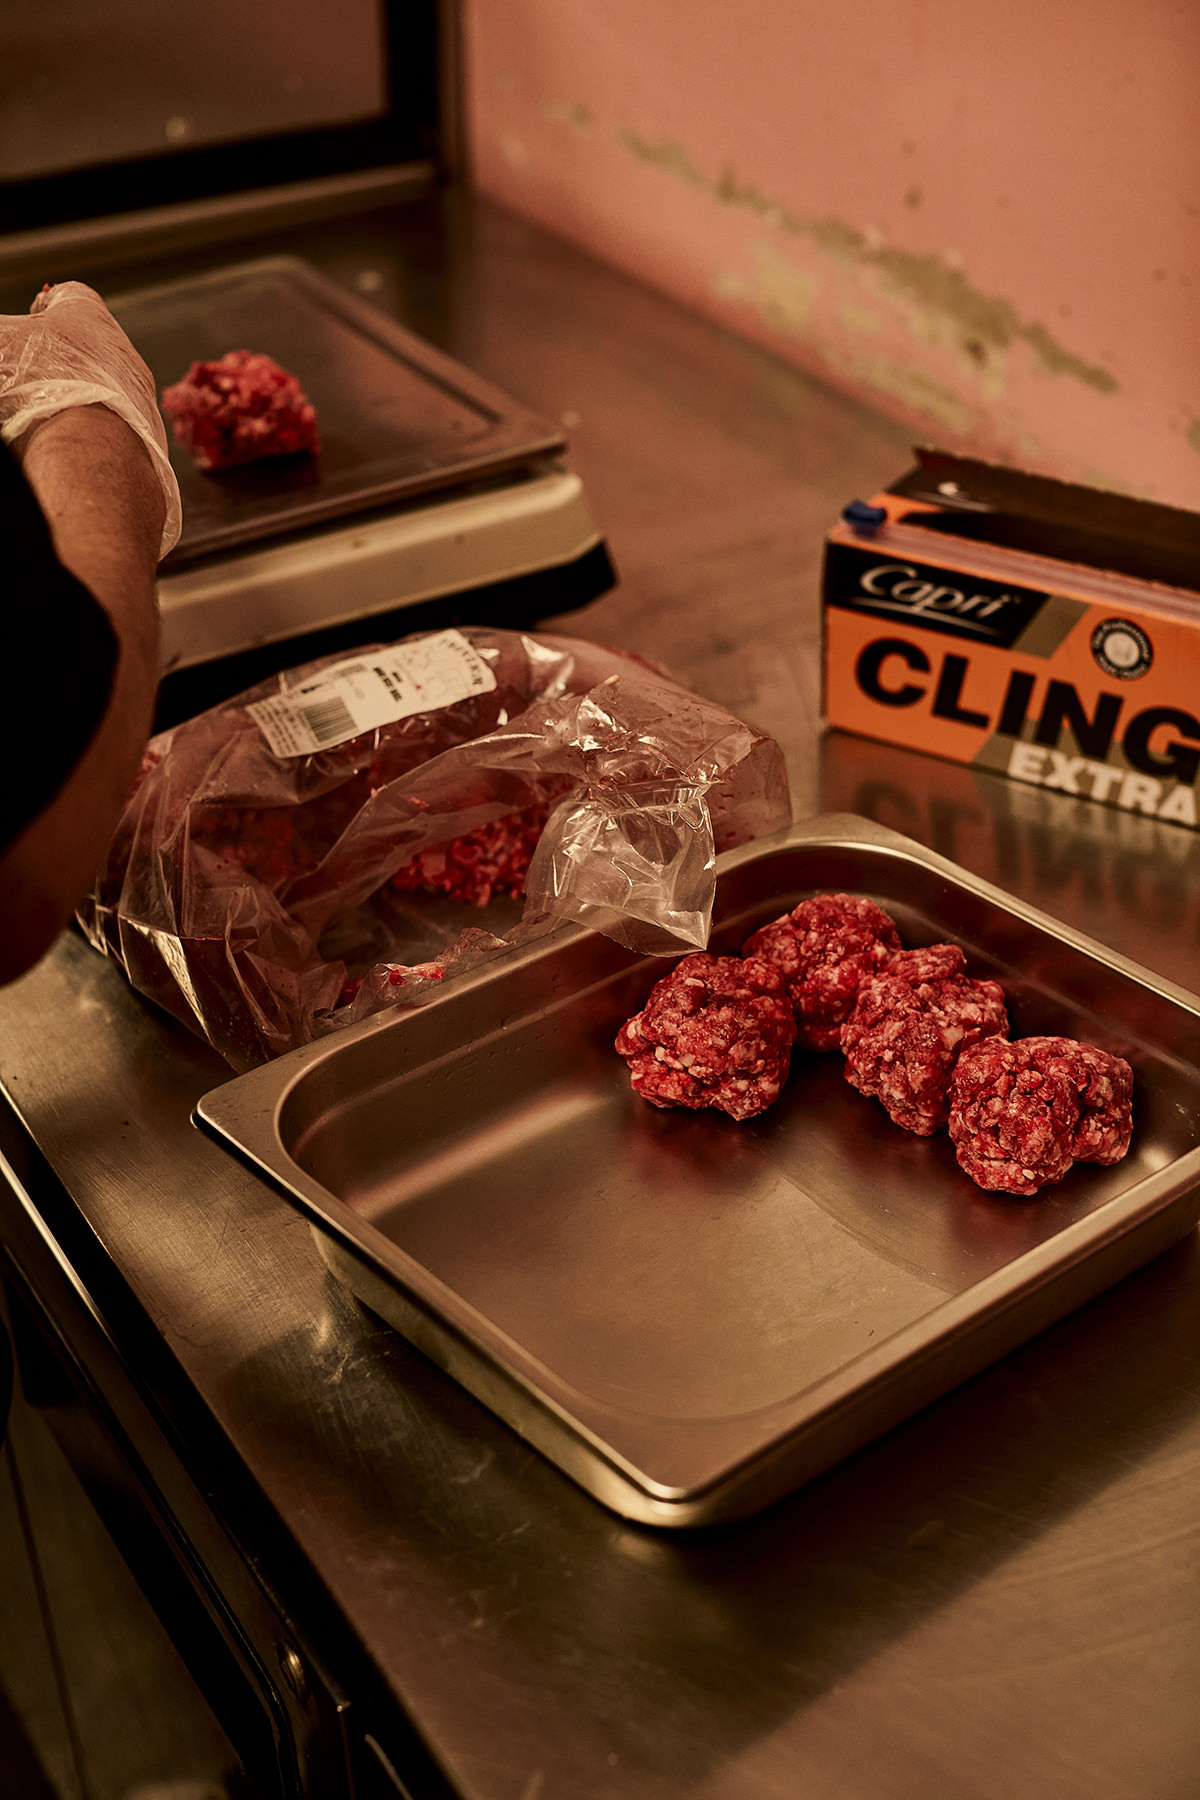 Raph works direct with his supplier for a burger mince that gives minimal shrinkage - using an 80:20 ratio based on available cuts like chuck, brisket, flank or knuckle.